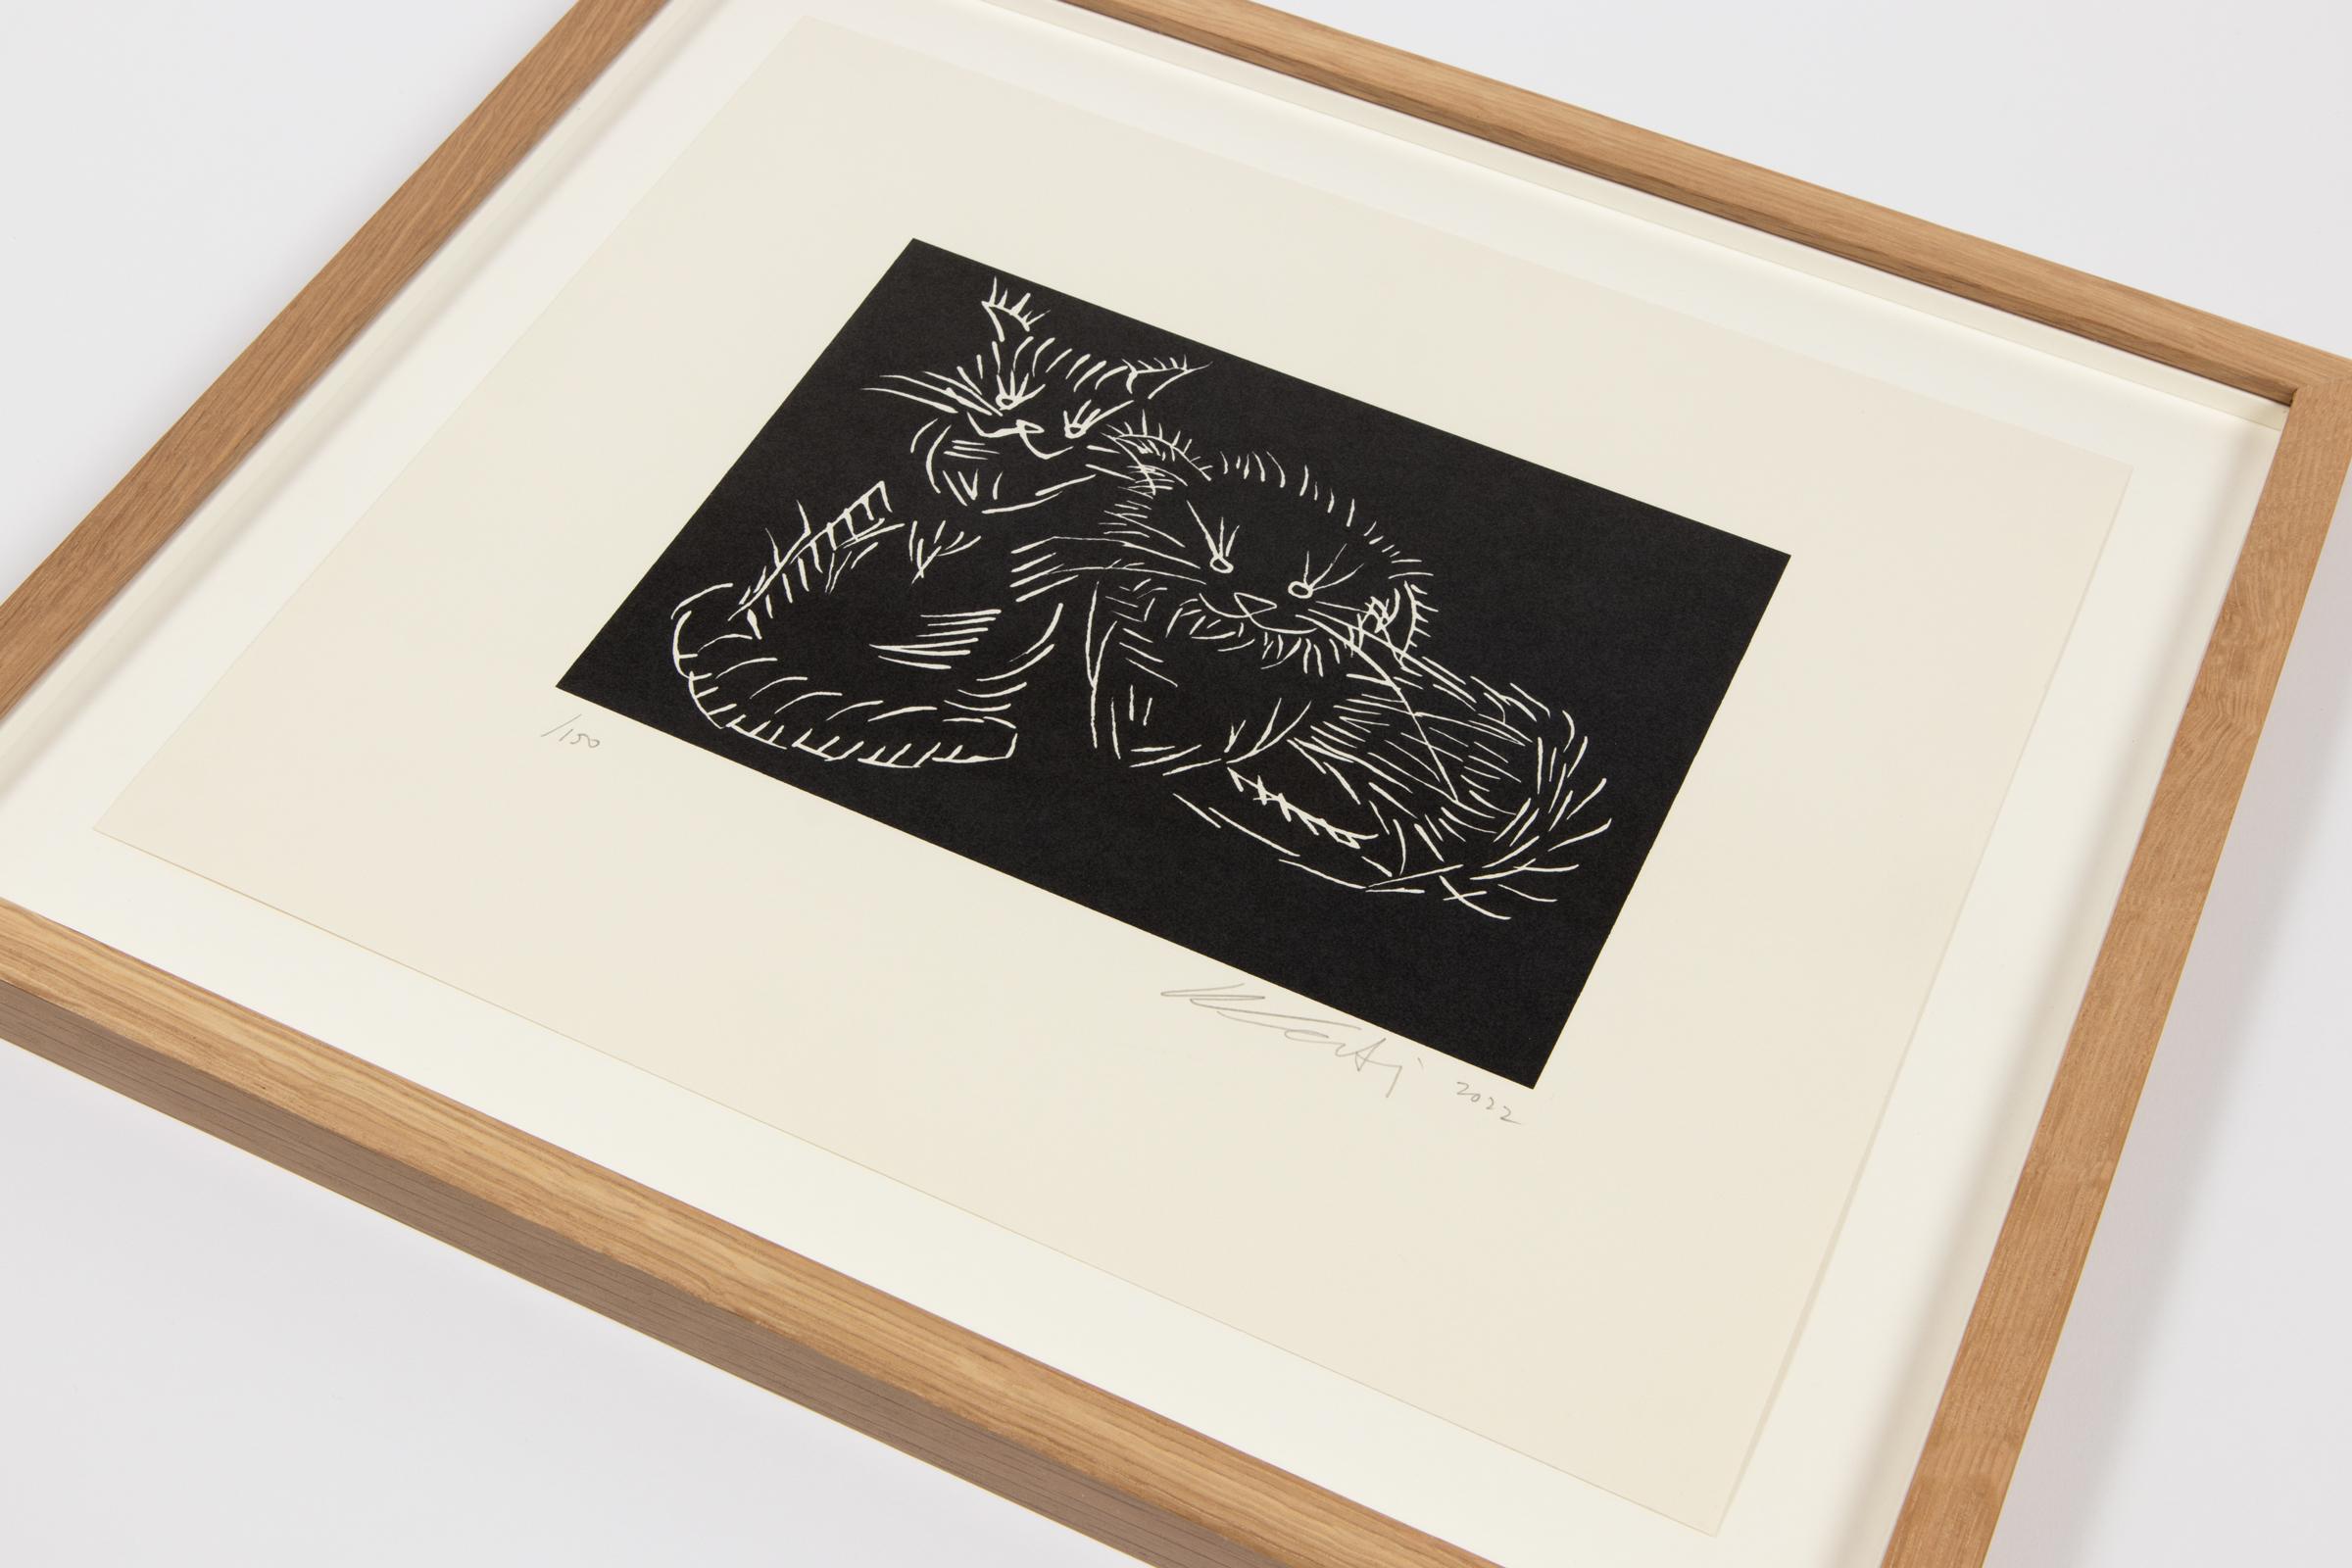 Ai Weiwei (Chinese, b. 1957)
Cats (Black), 2022
Medium: Screenprint on paper
Sheet dimensions: 28 x 32.8 cm
Frame dimensions: 36.1 x 41.2 cm
Edition of 150: Hand signed, numbered and dated
Printer: Kip Gresham at The Print Studio,